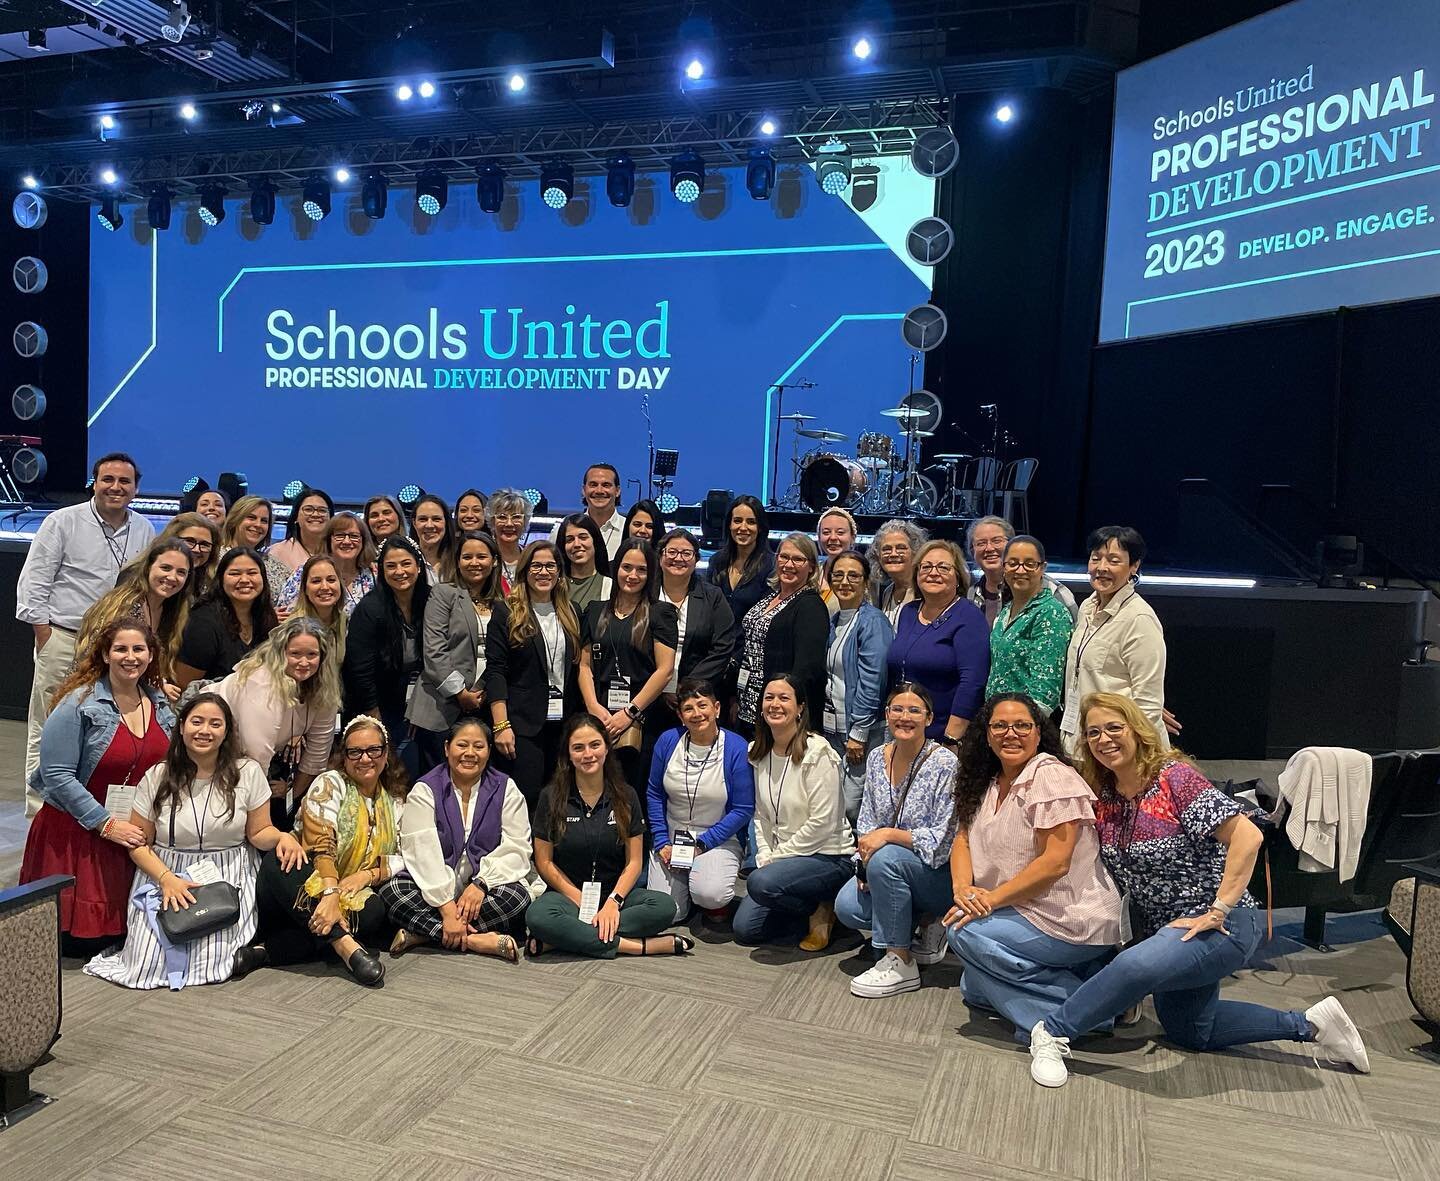 Alongside 2,000+ Christian school professionals, KCS faculty &amp; staff attended the Schools United Professional Development conference on Friday. We heard from John Stonestreet and Lt. Governor Nunez,  attended subject specific breakout sessions, a